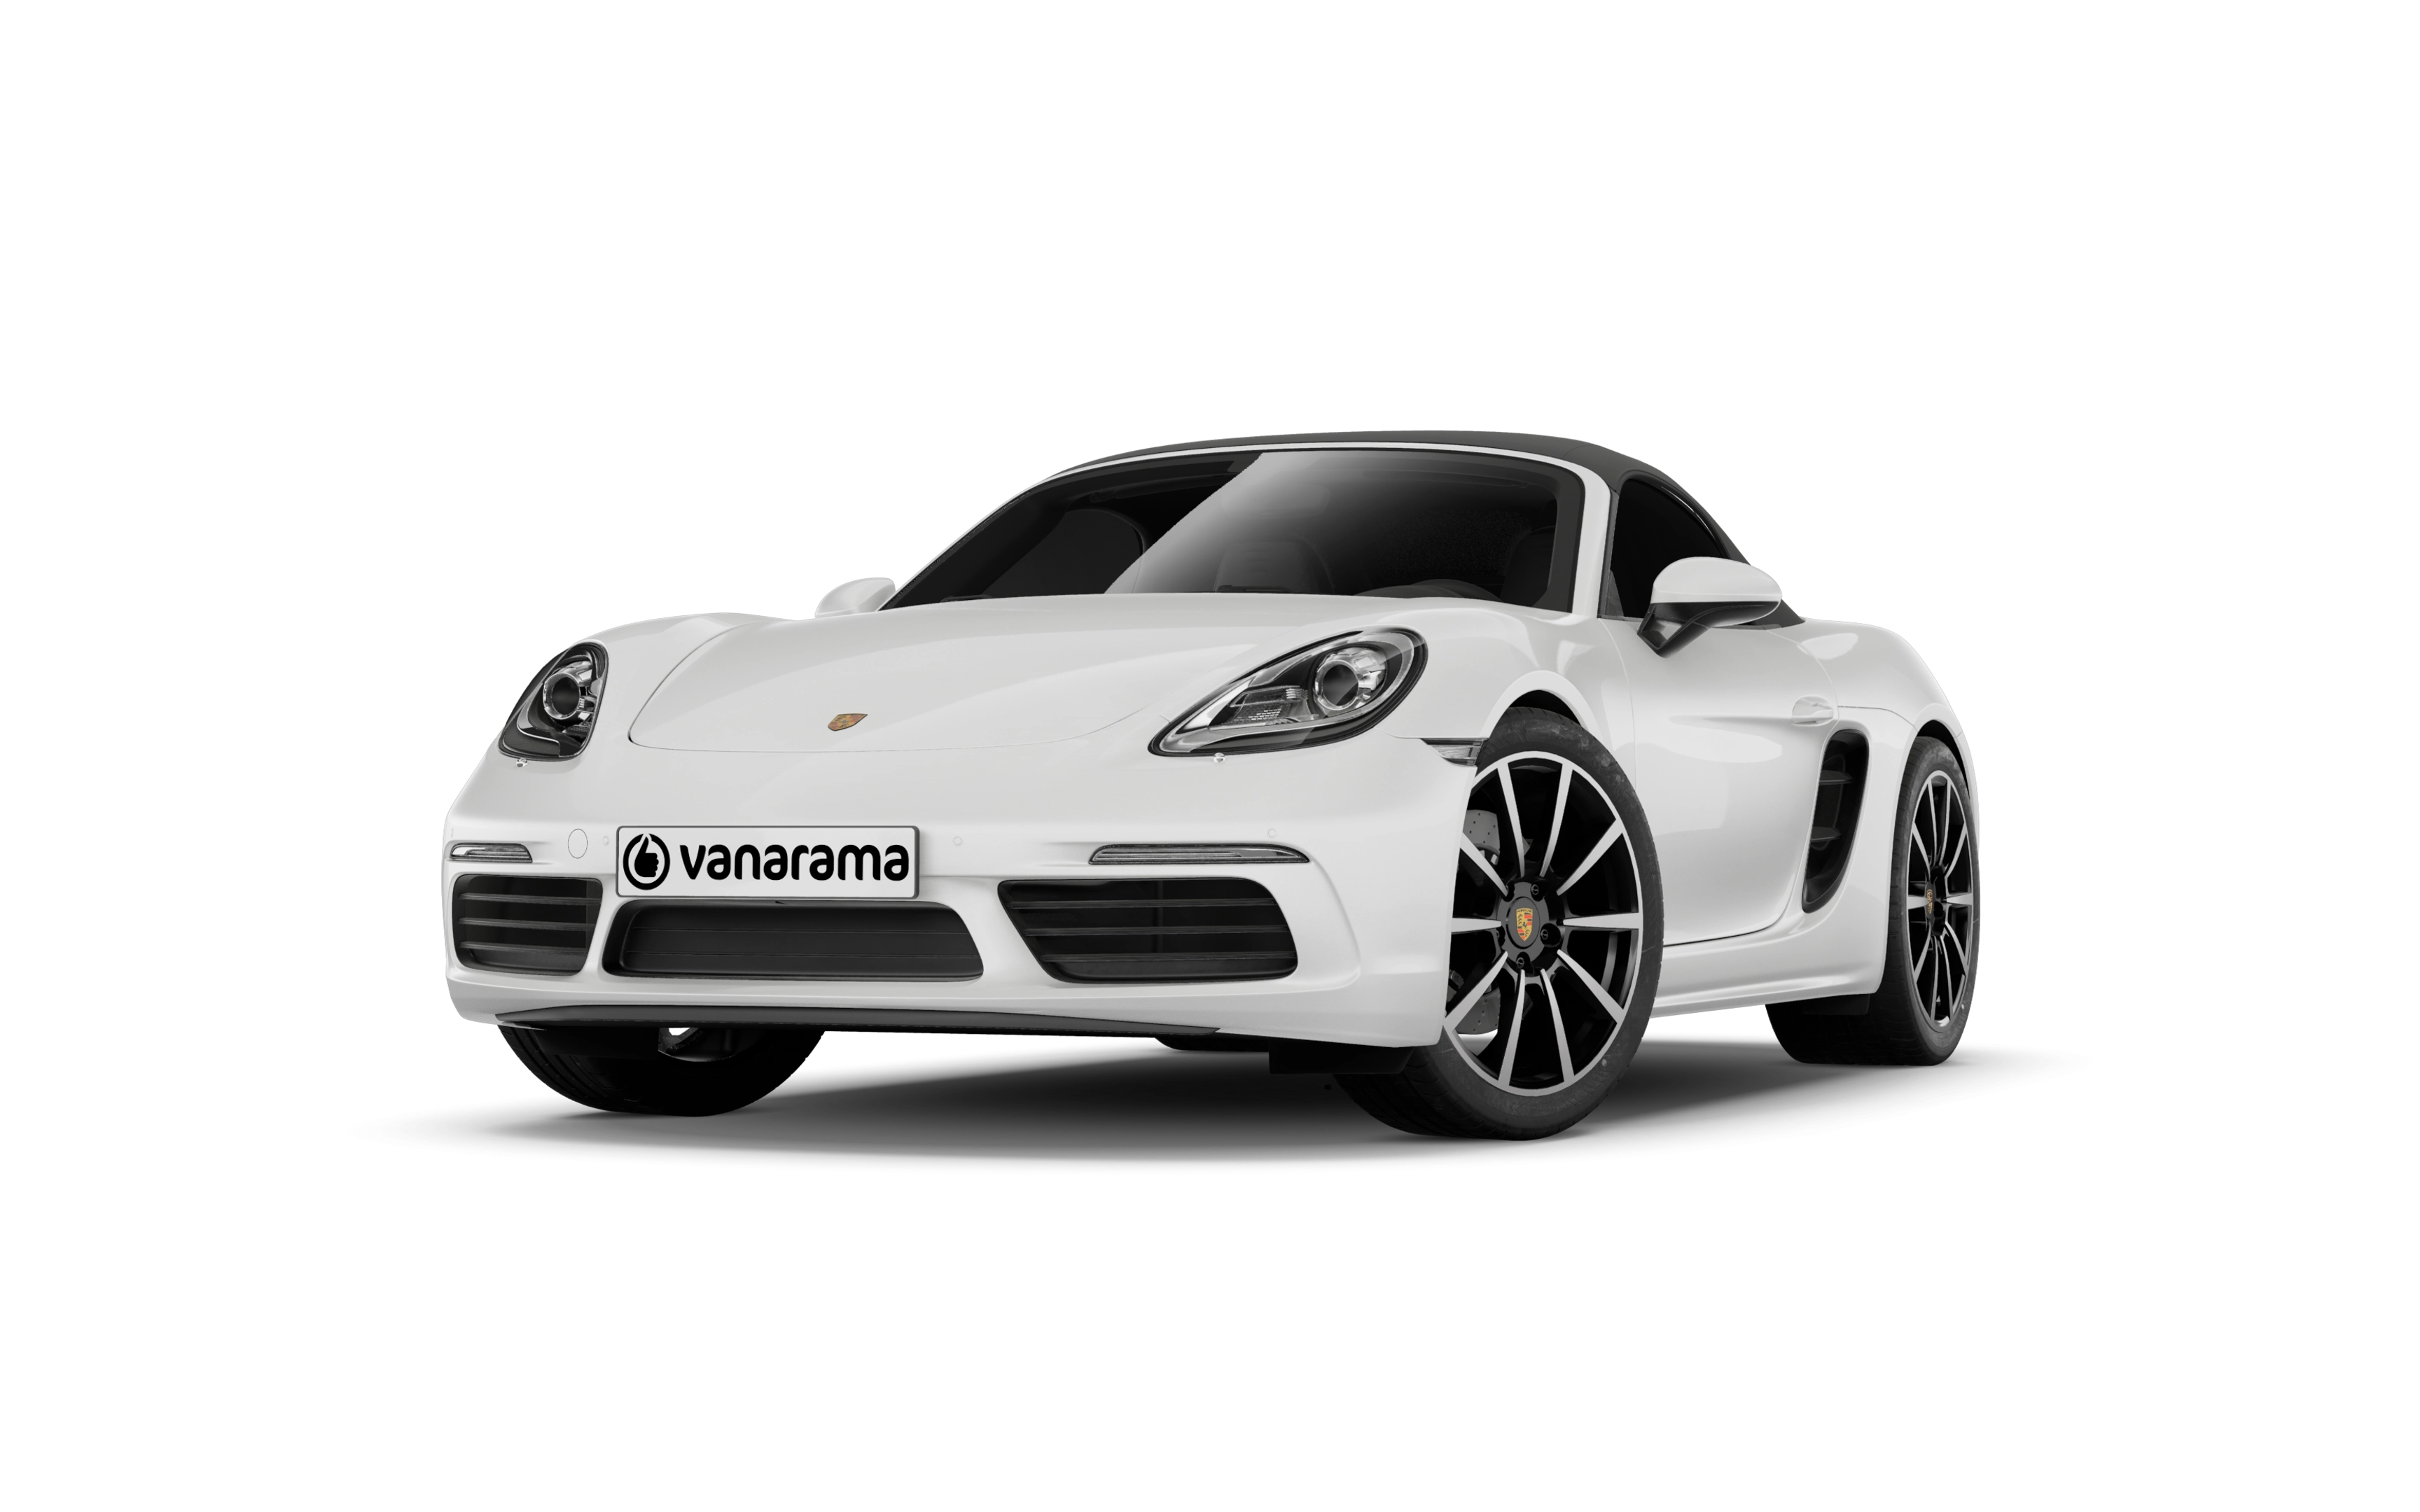 Porsche 718 boxster roadster 2.0 style edition 2 doors